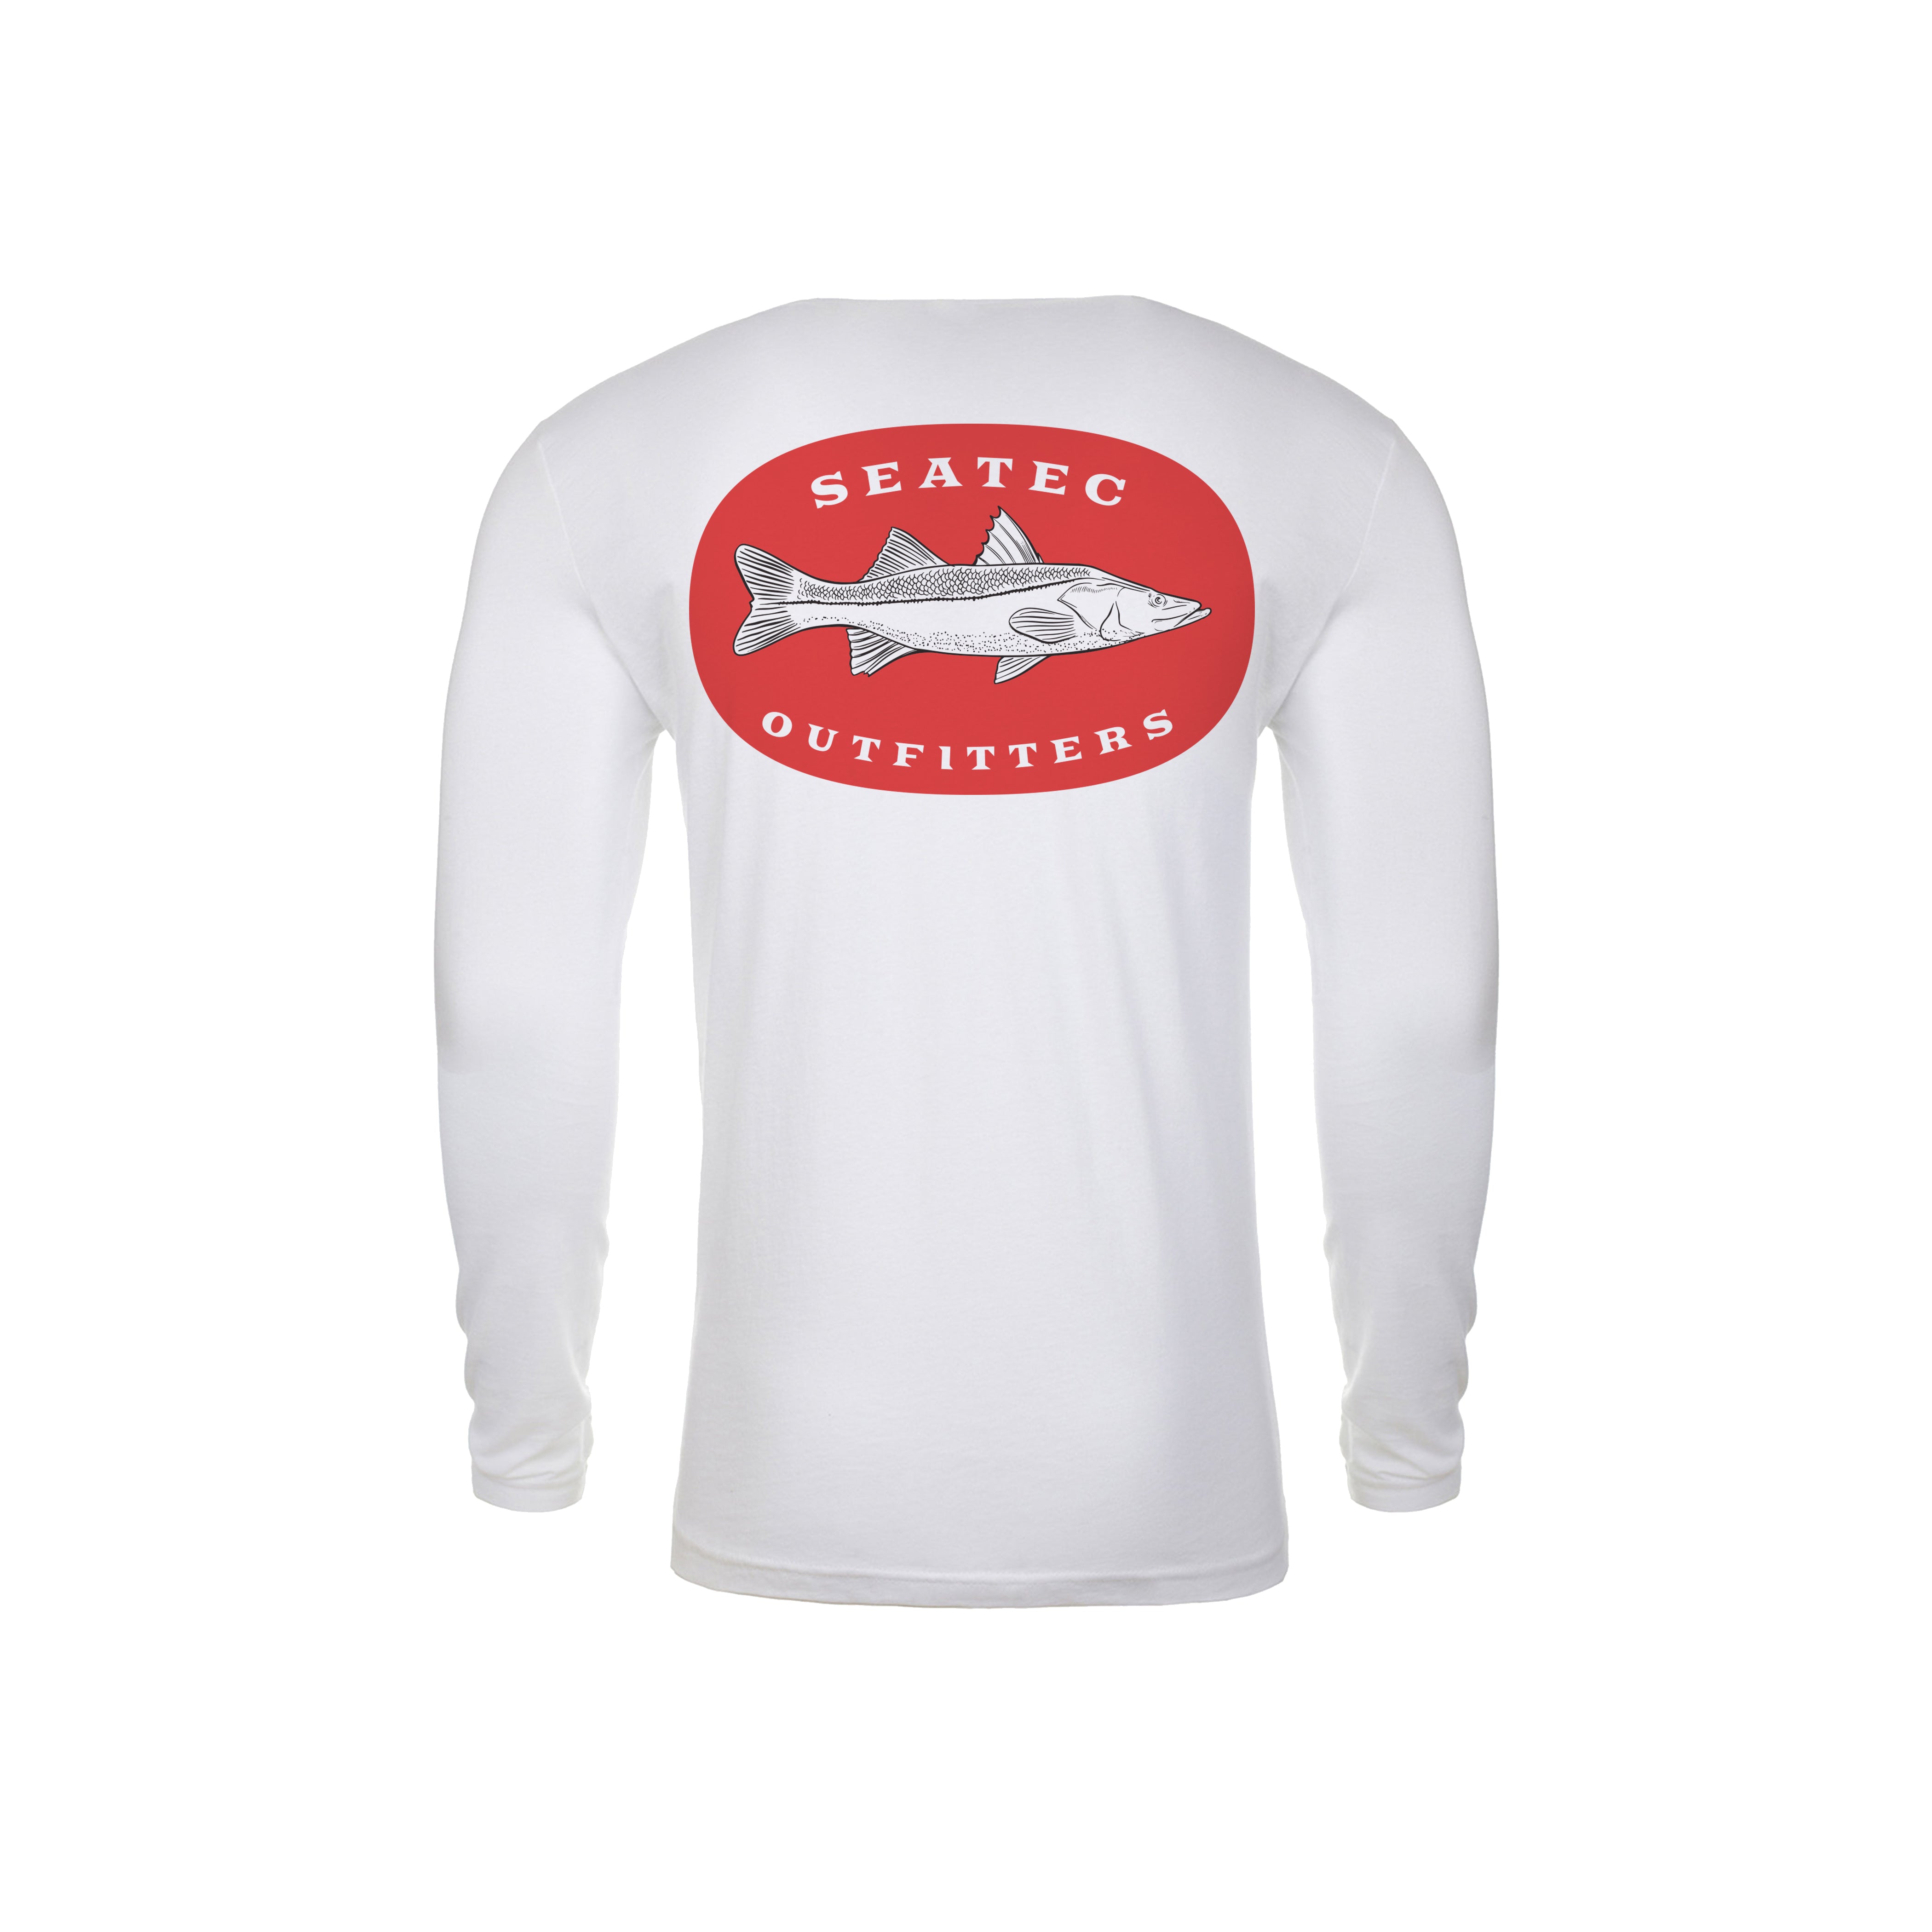 Seatec Outfitters Men's FlyLong Sleeve Fishing Shirts - Best Fishing Shirt - UPF 50+, Snag Resistant, Moisture Wicking Small